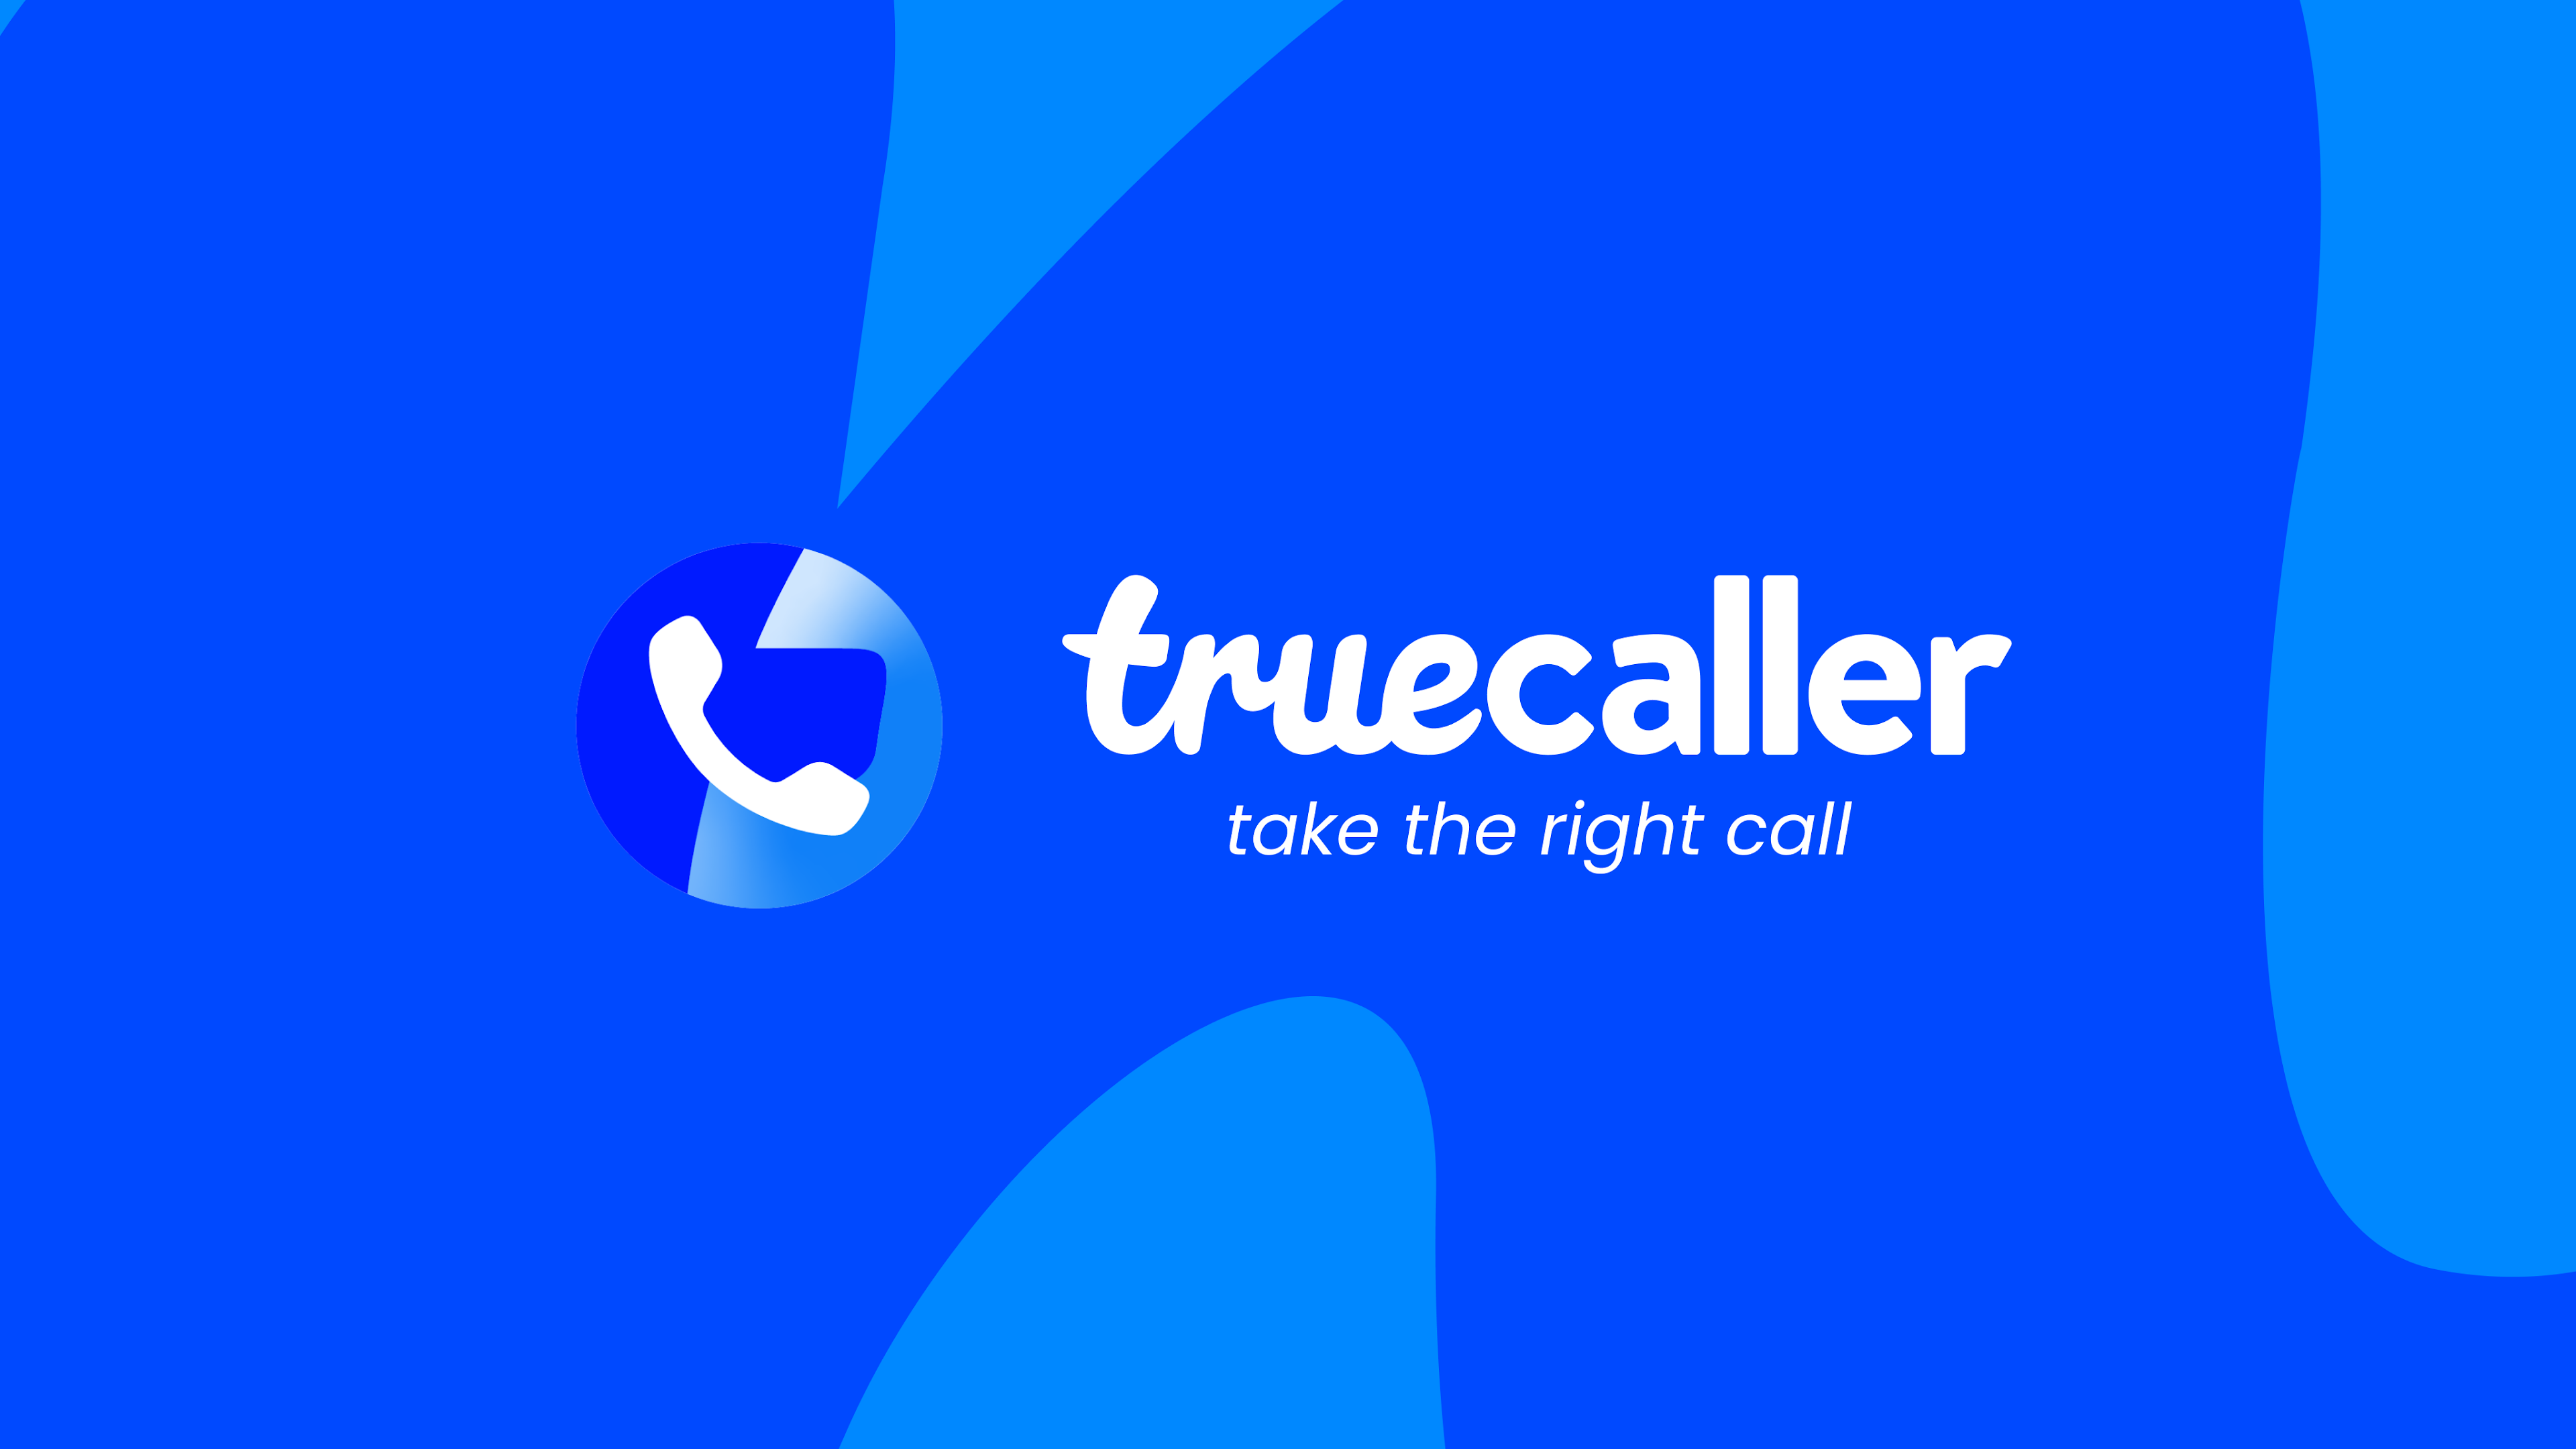 Spend your time more efficiently: Truecaller anti-spam call detection service allows you to create your own AI voice model to answer spam calls